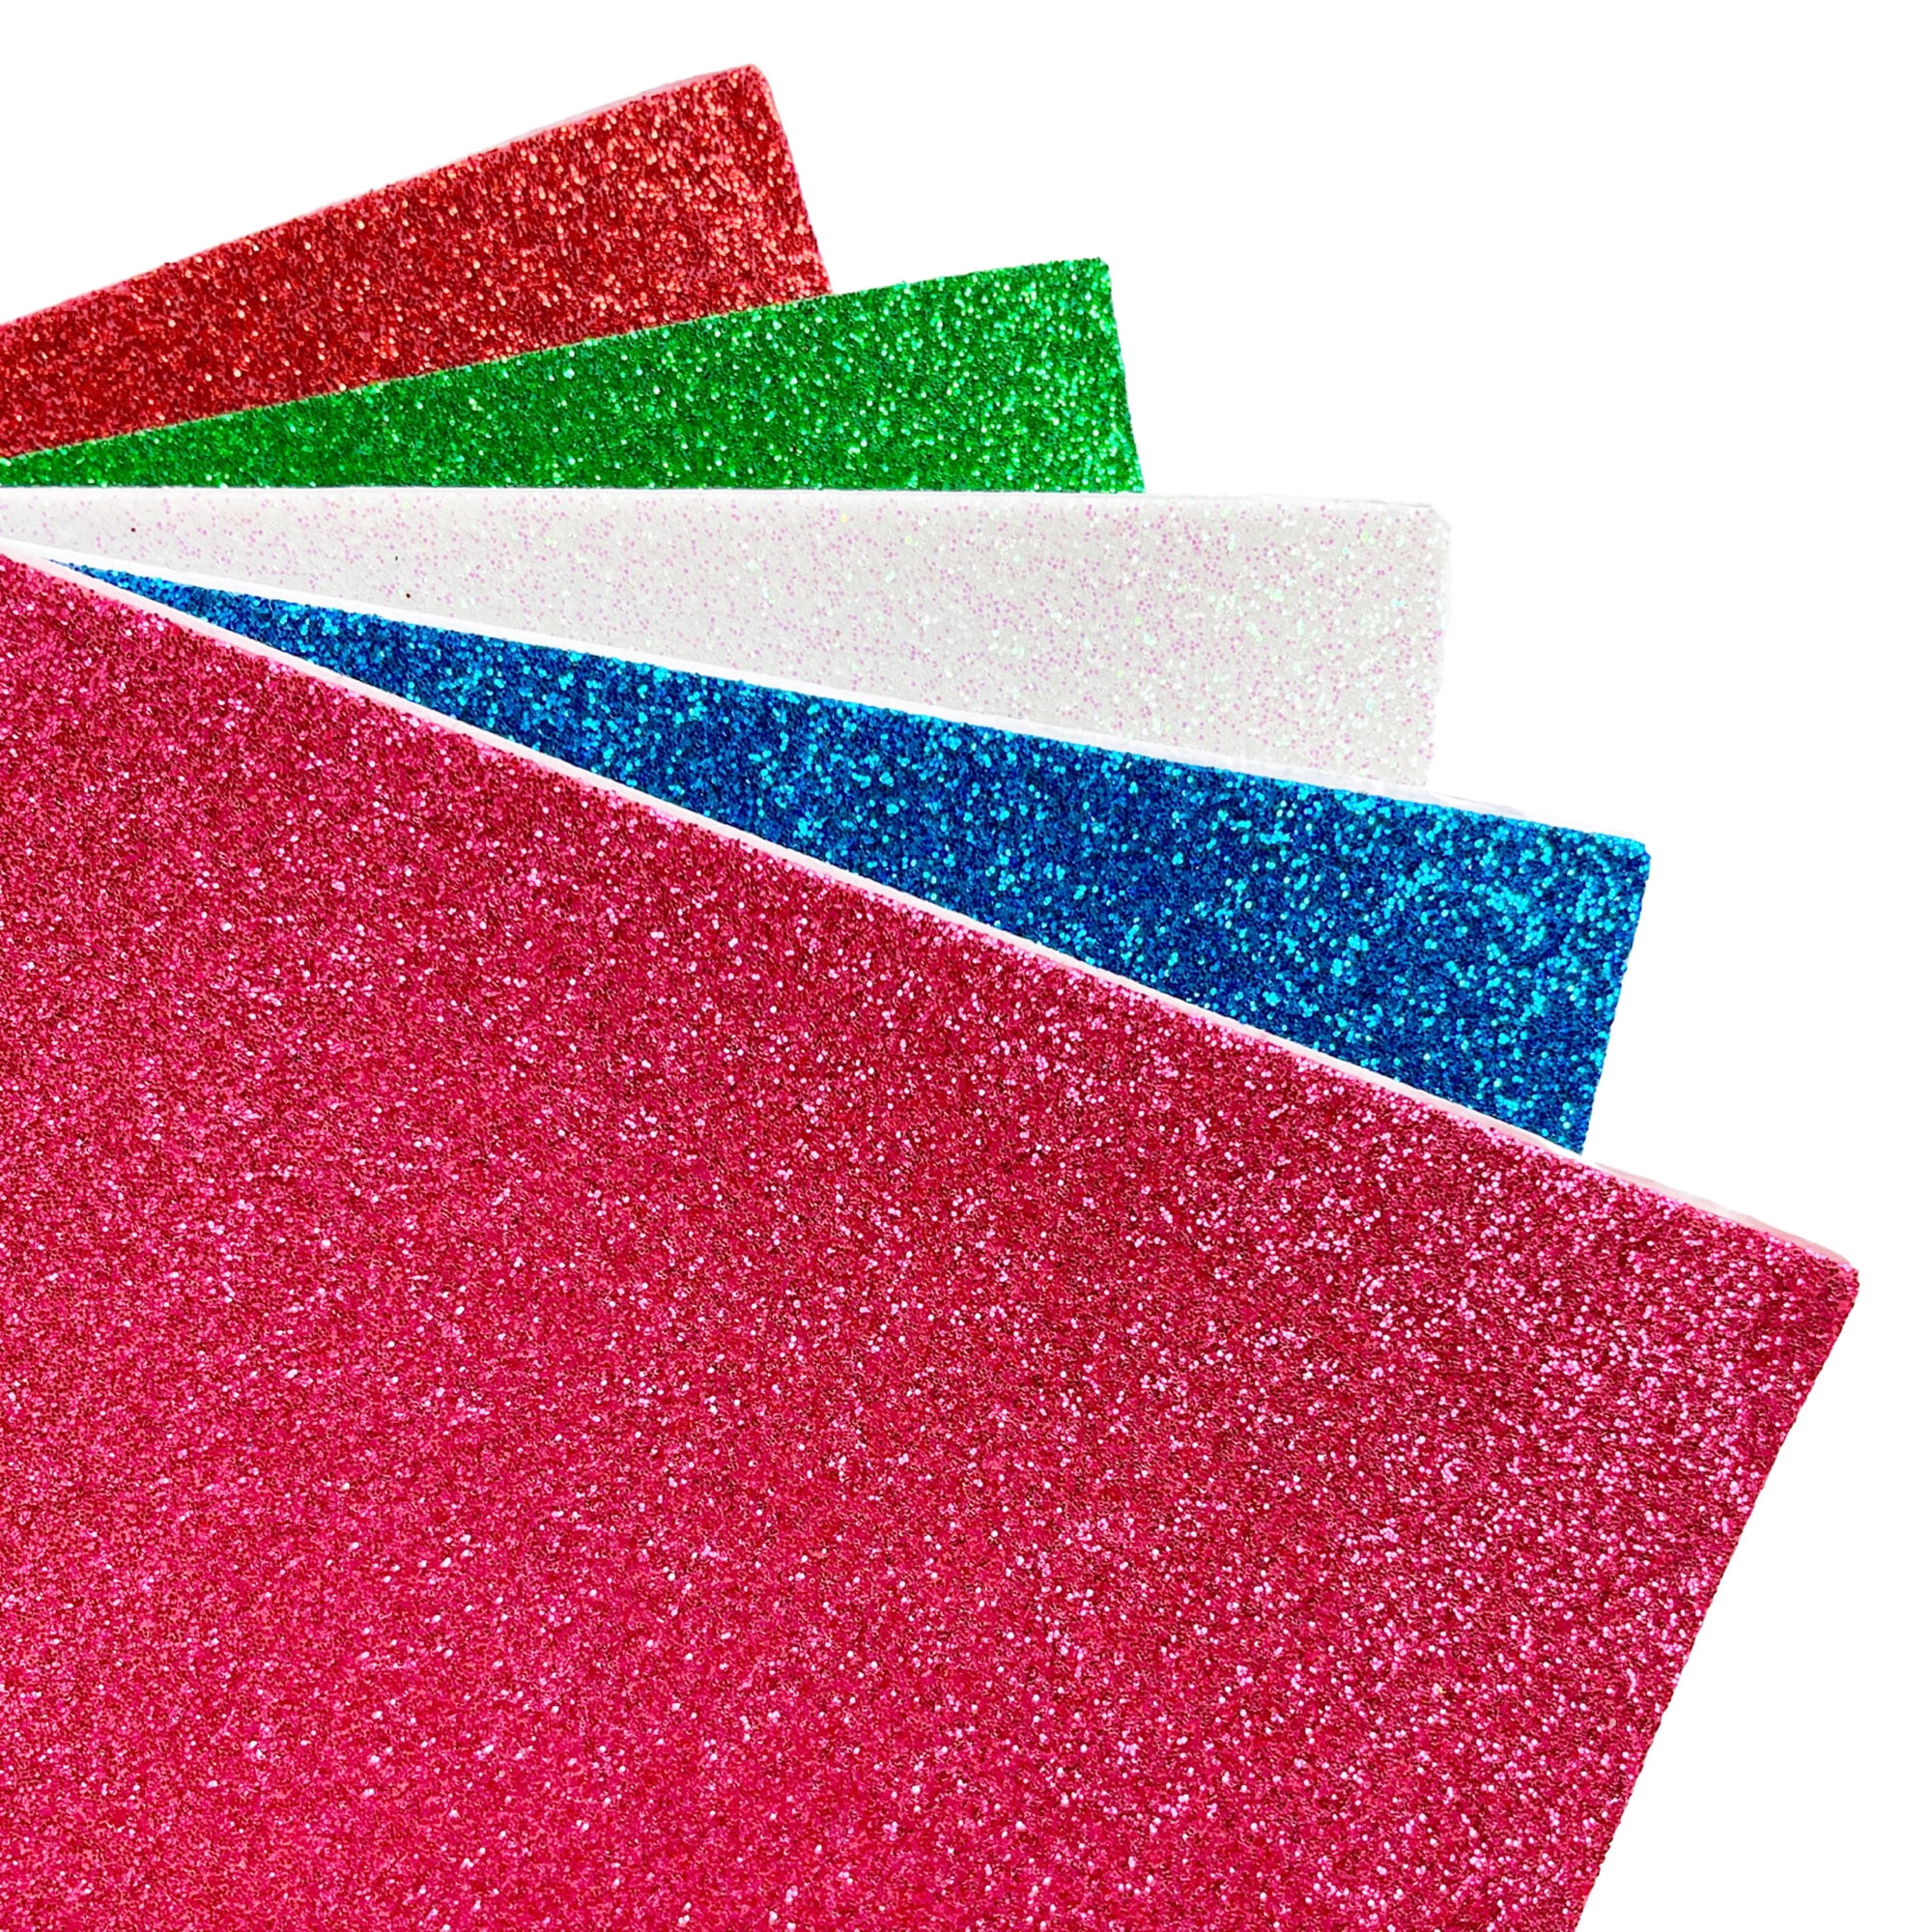 Hello Hobby 9 inch x 12 inch Adhesive Glitter Foam Sheets for Crafts, 5 Assorted Colors, 5pc